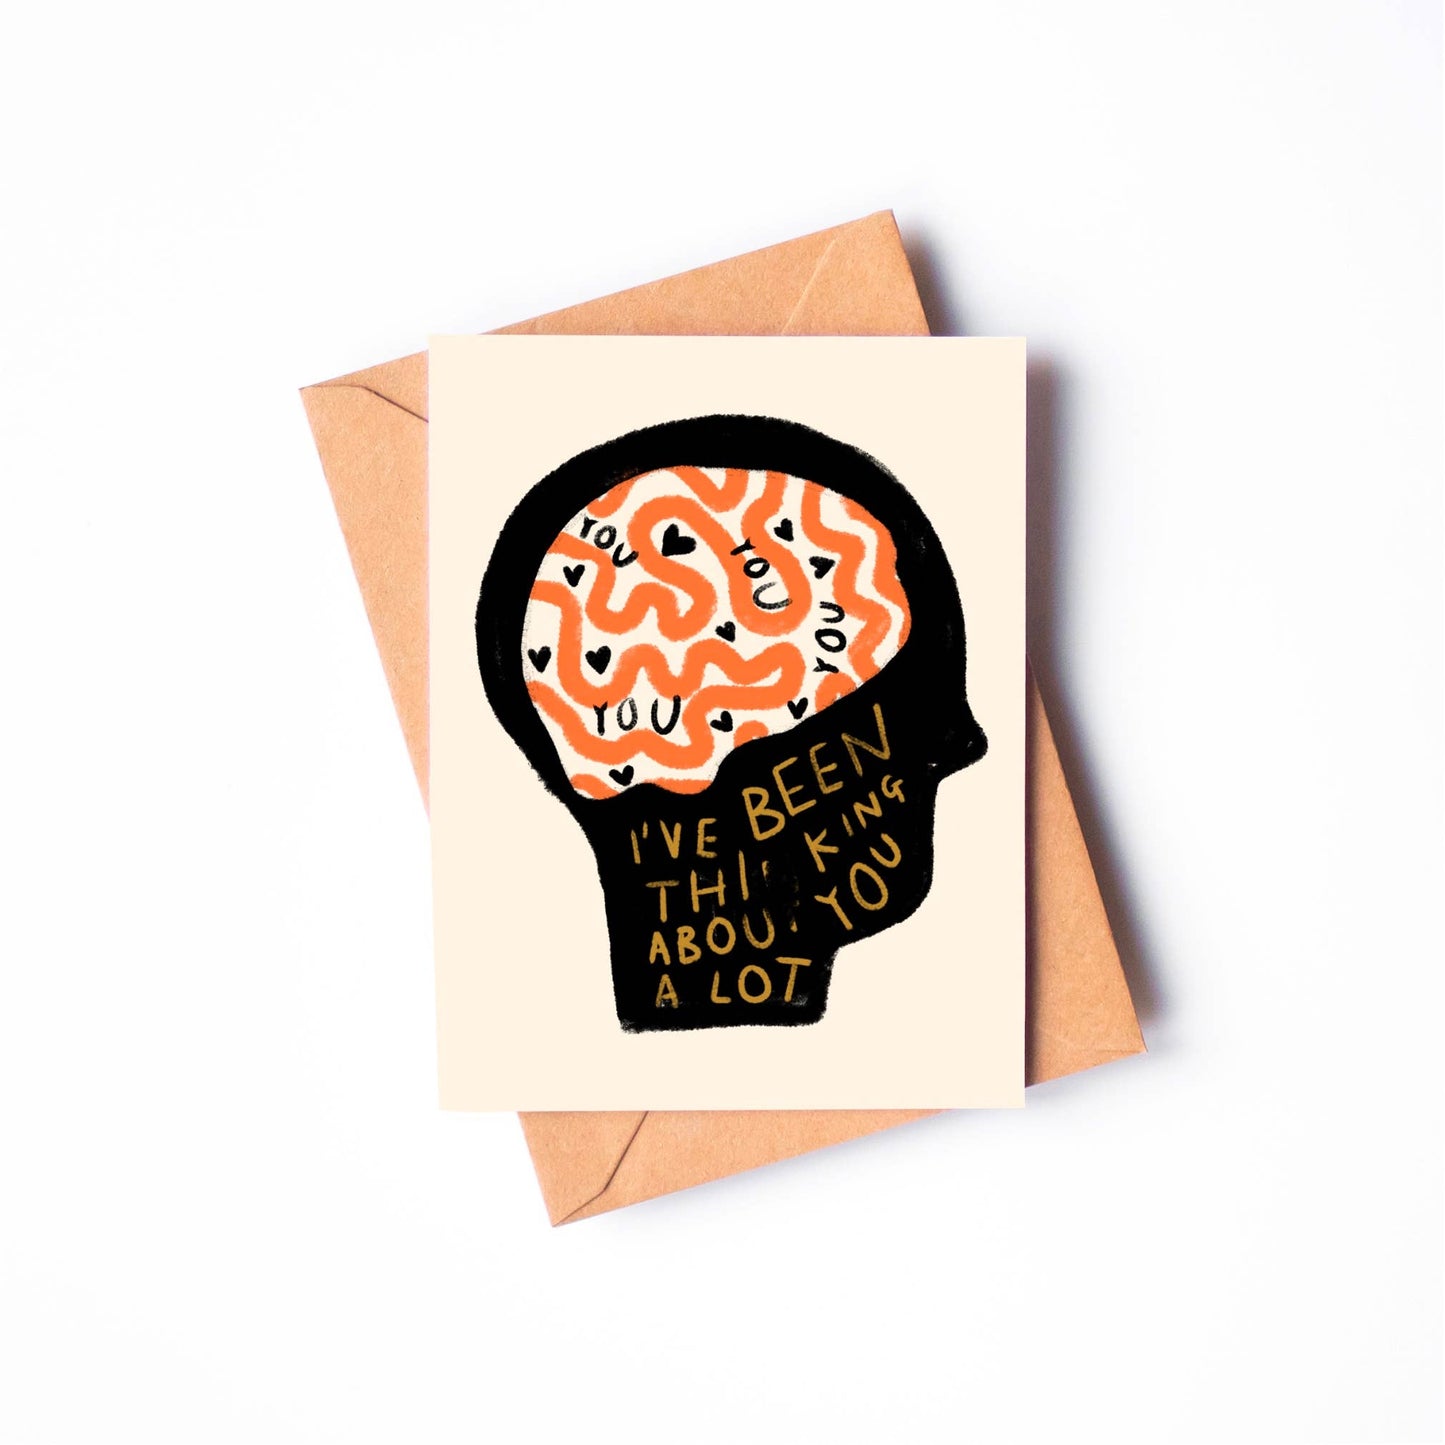 I'VE BEEN THINKING ABOUT YOU A LOT Greeting Card